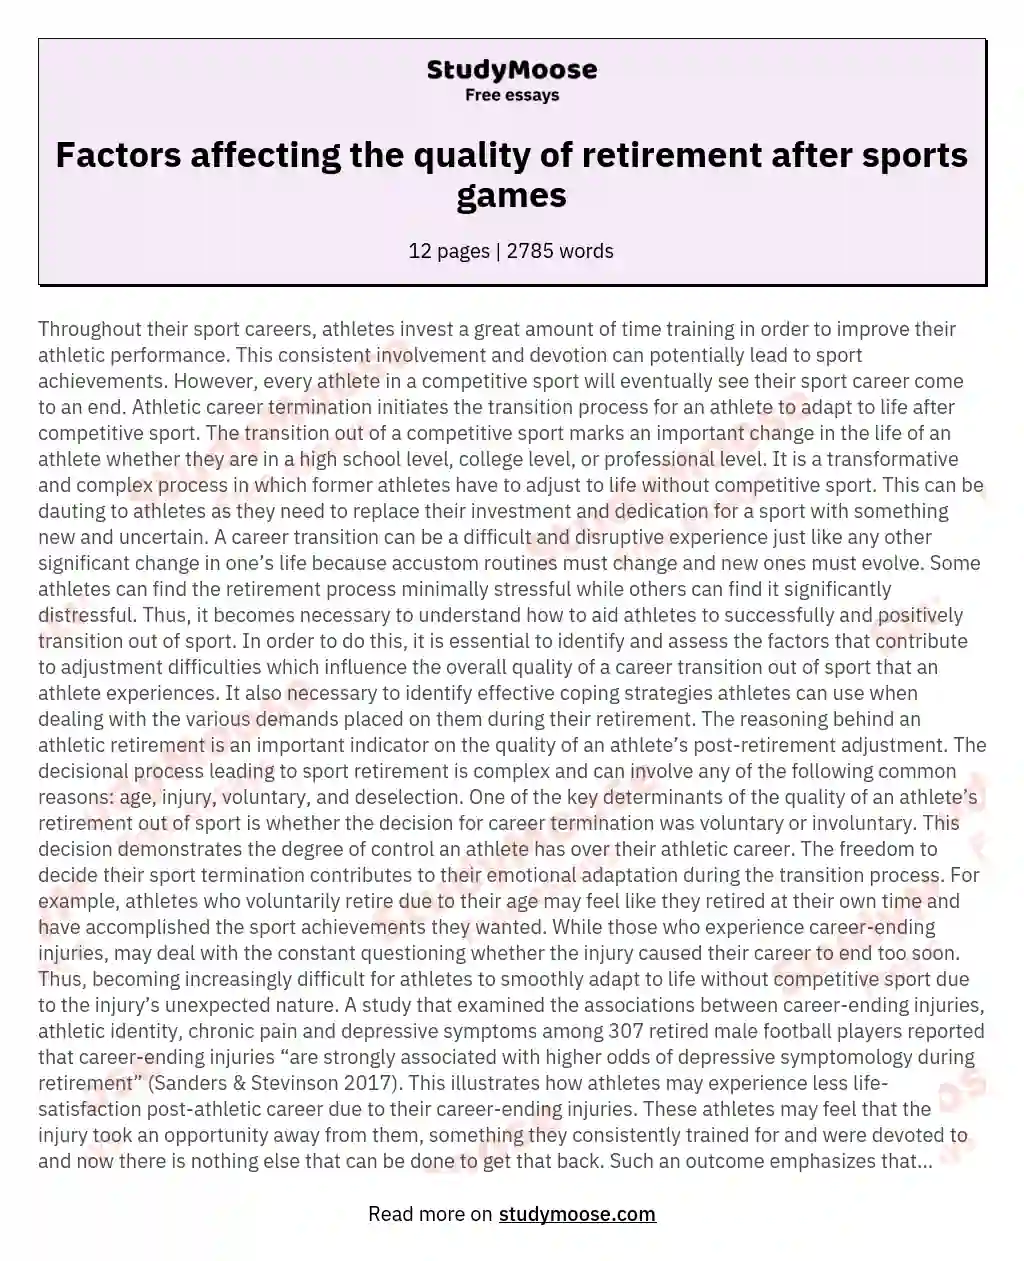 Factors affecting the quality of retirement after sports games essay